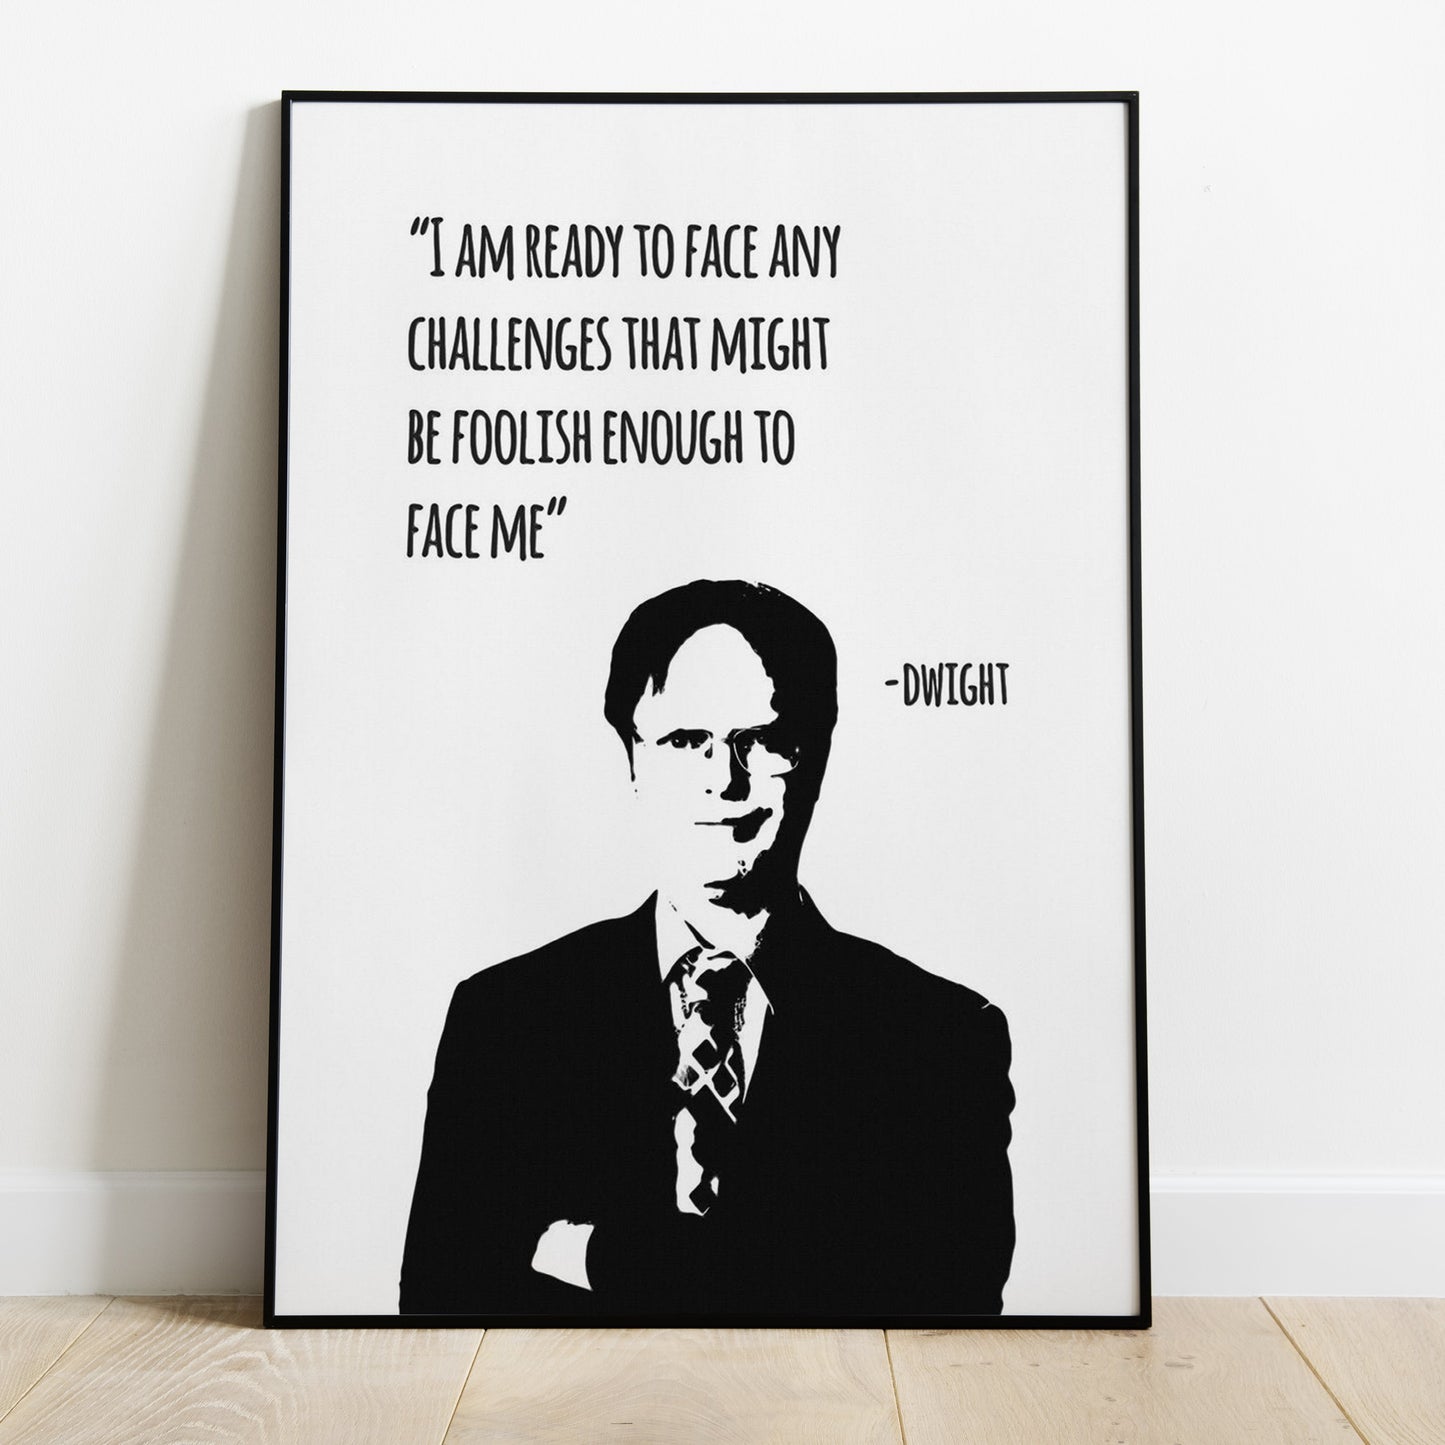 THE OFFICE Wall Art Poster for Home Office